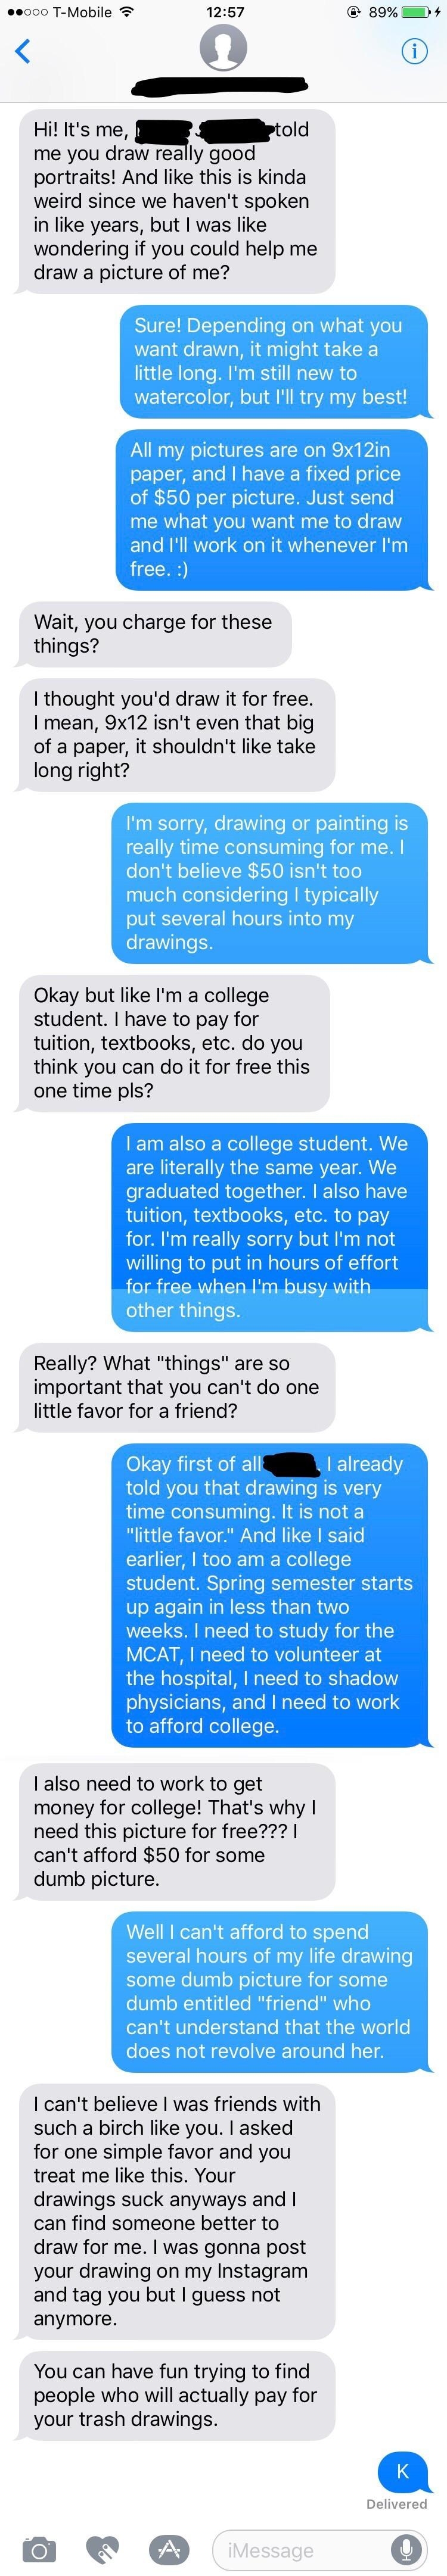 Person says they can&#x27;t afford to pay &#x27;cause they&#x27;re a college student, and when artist says they&#x27;re a college student too, person says the drawings suck anyway